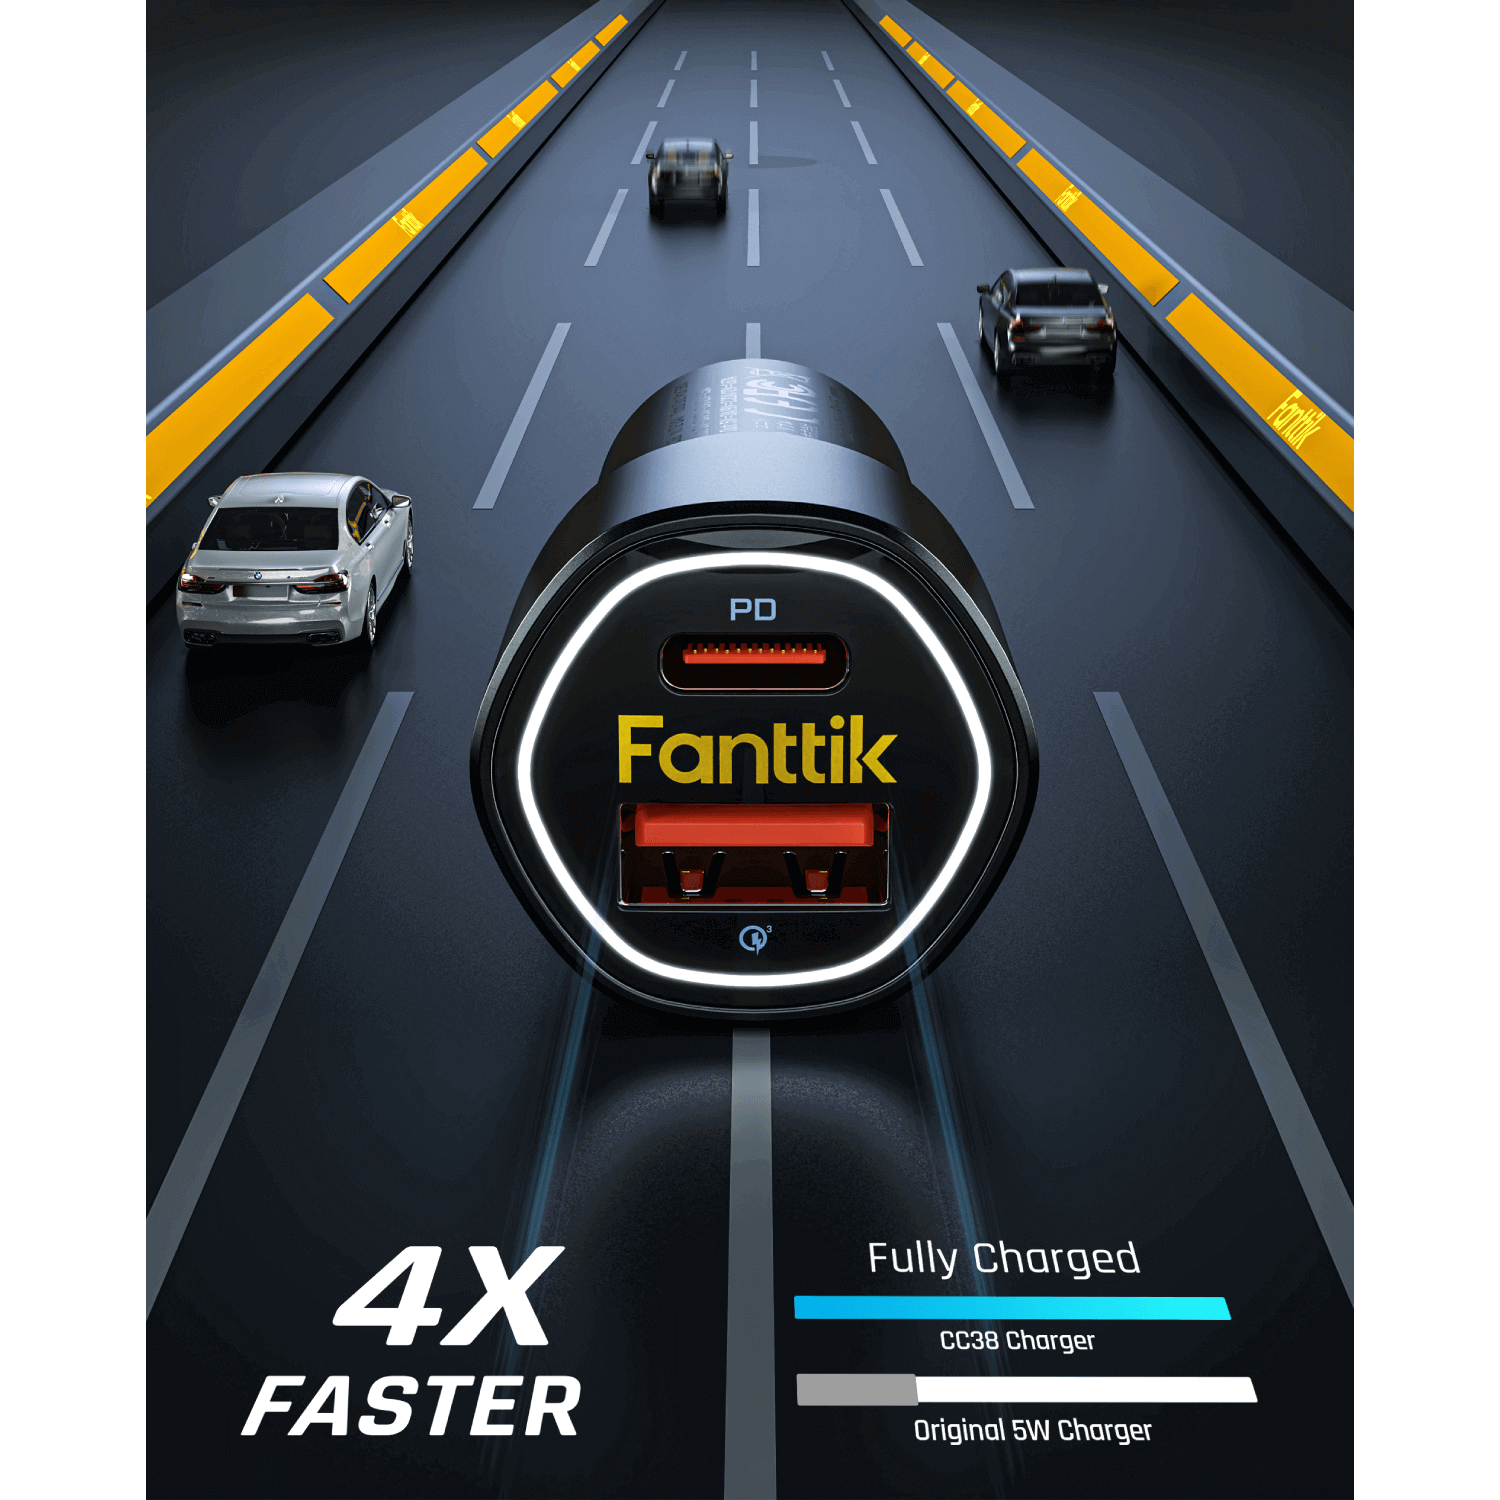 Fanttik 38W USB C Car Charger can intelligently charge 2 devices simultaneously at full speed with type c PD20W & USB QC18W output, up to 4X faster charging speed than the standard charger.